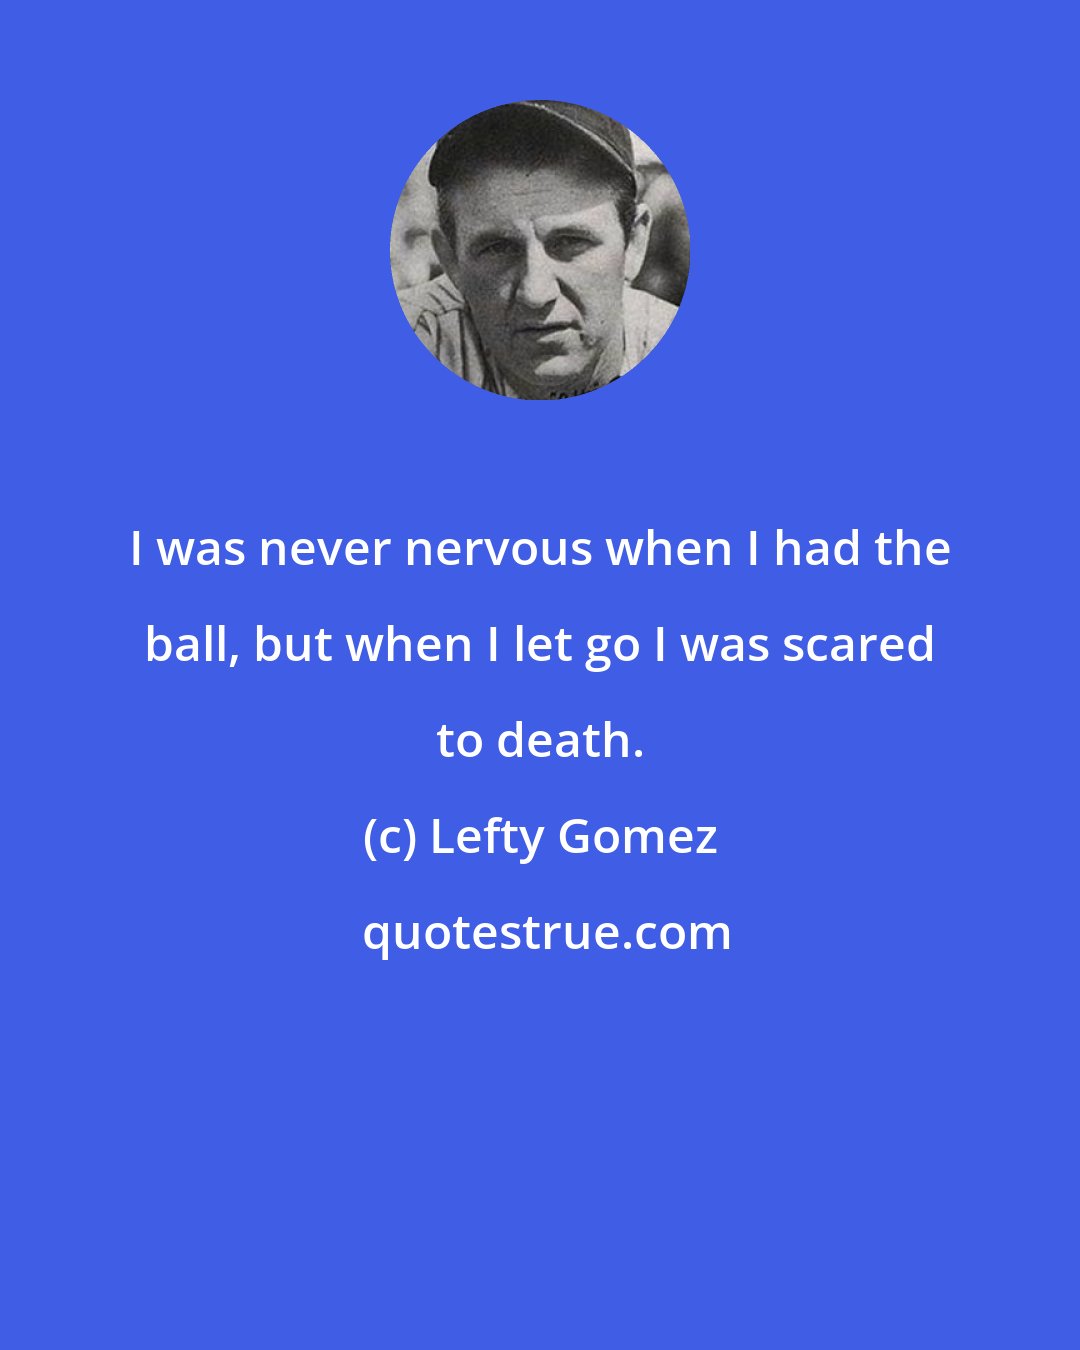 Lefty Gomez: I was never nervous when I had the ball, but when I let go I was scared to death.